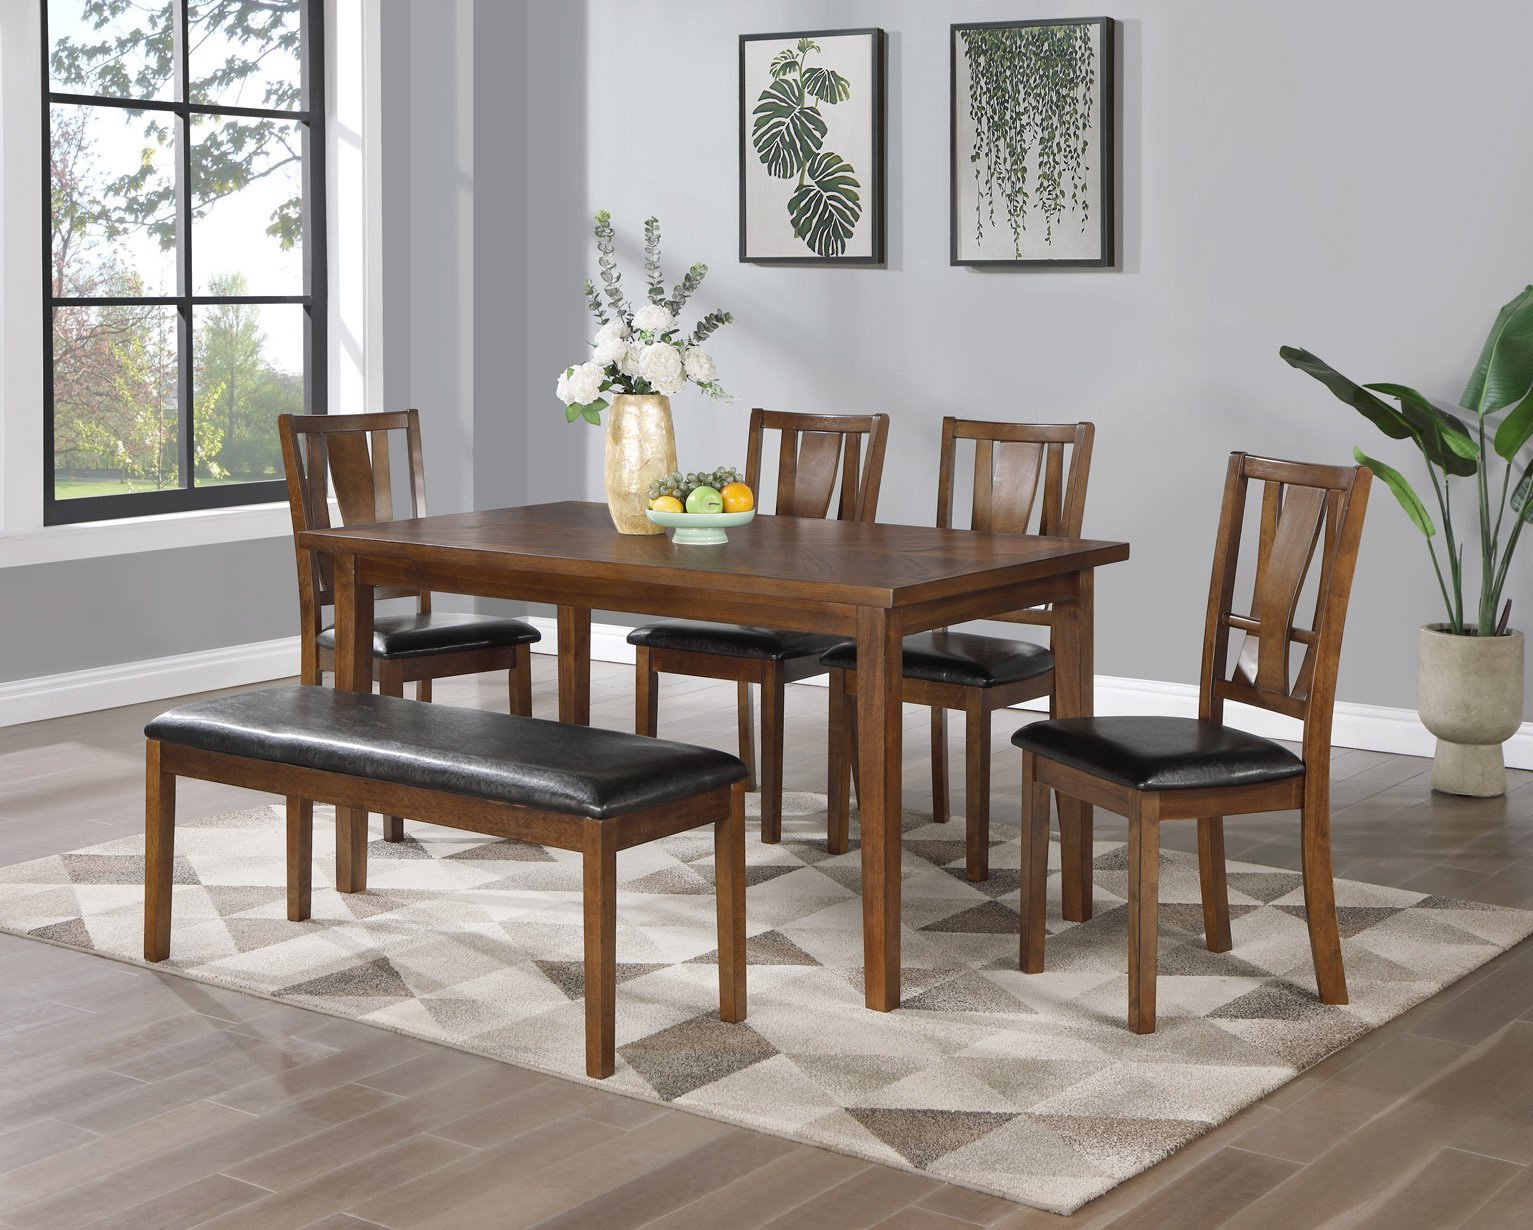 6 Piece Dining Set with Bench, Brown Cherry